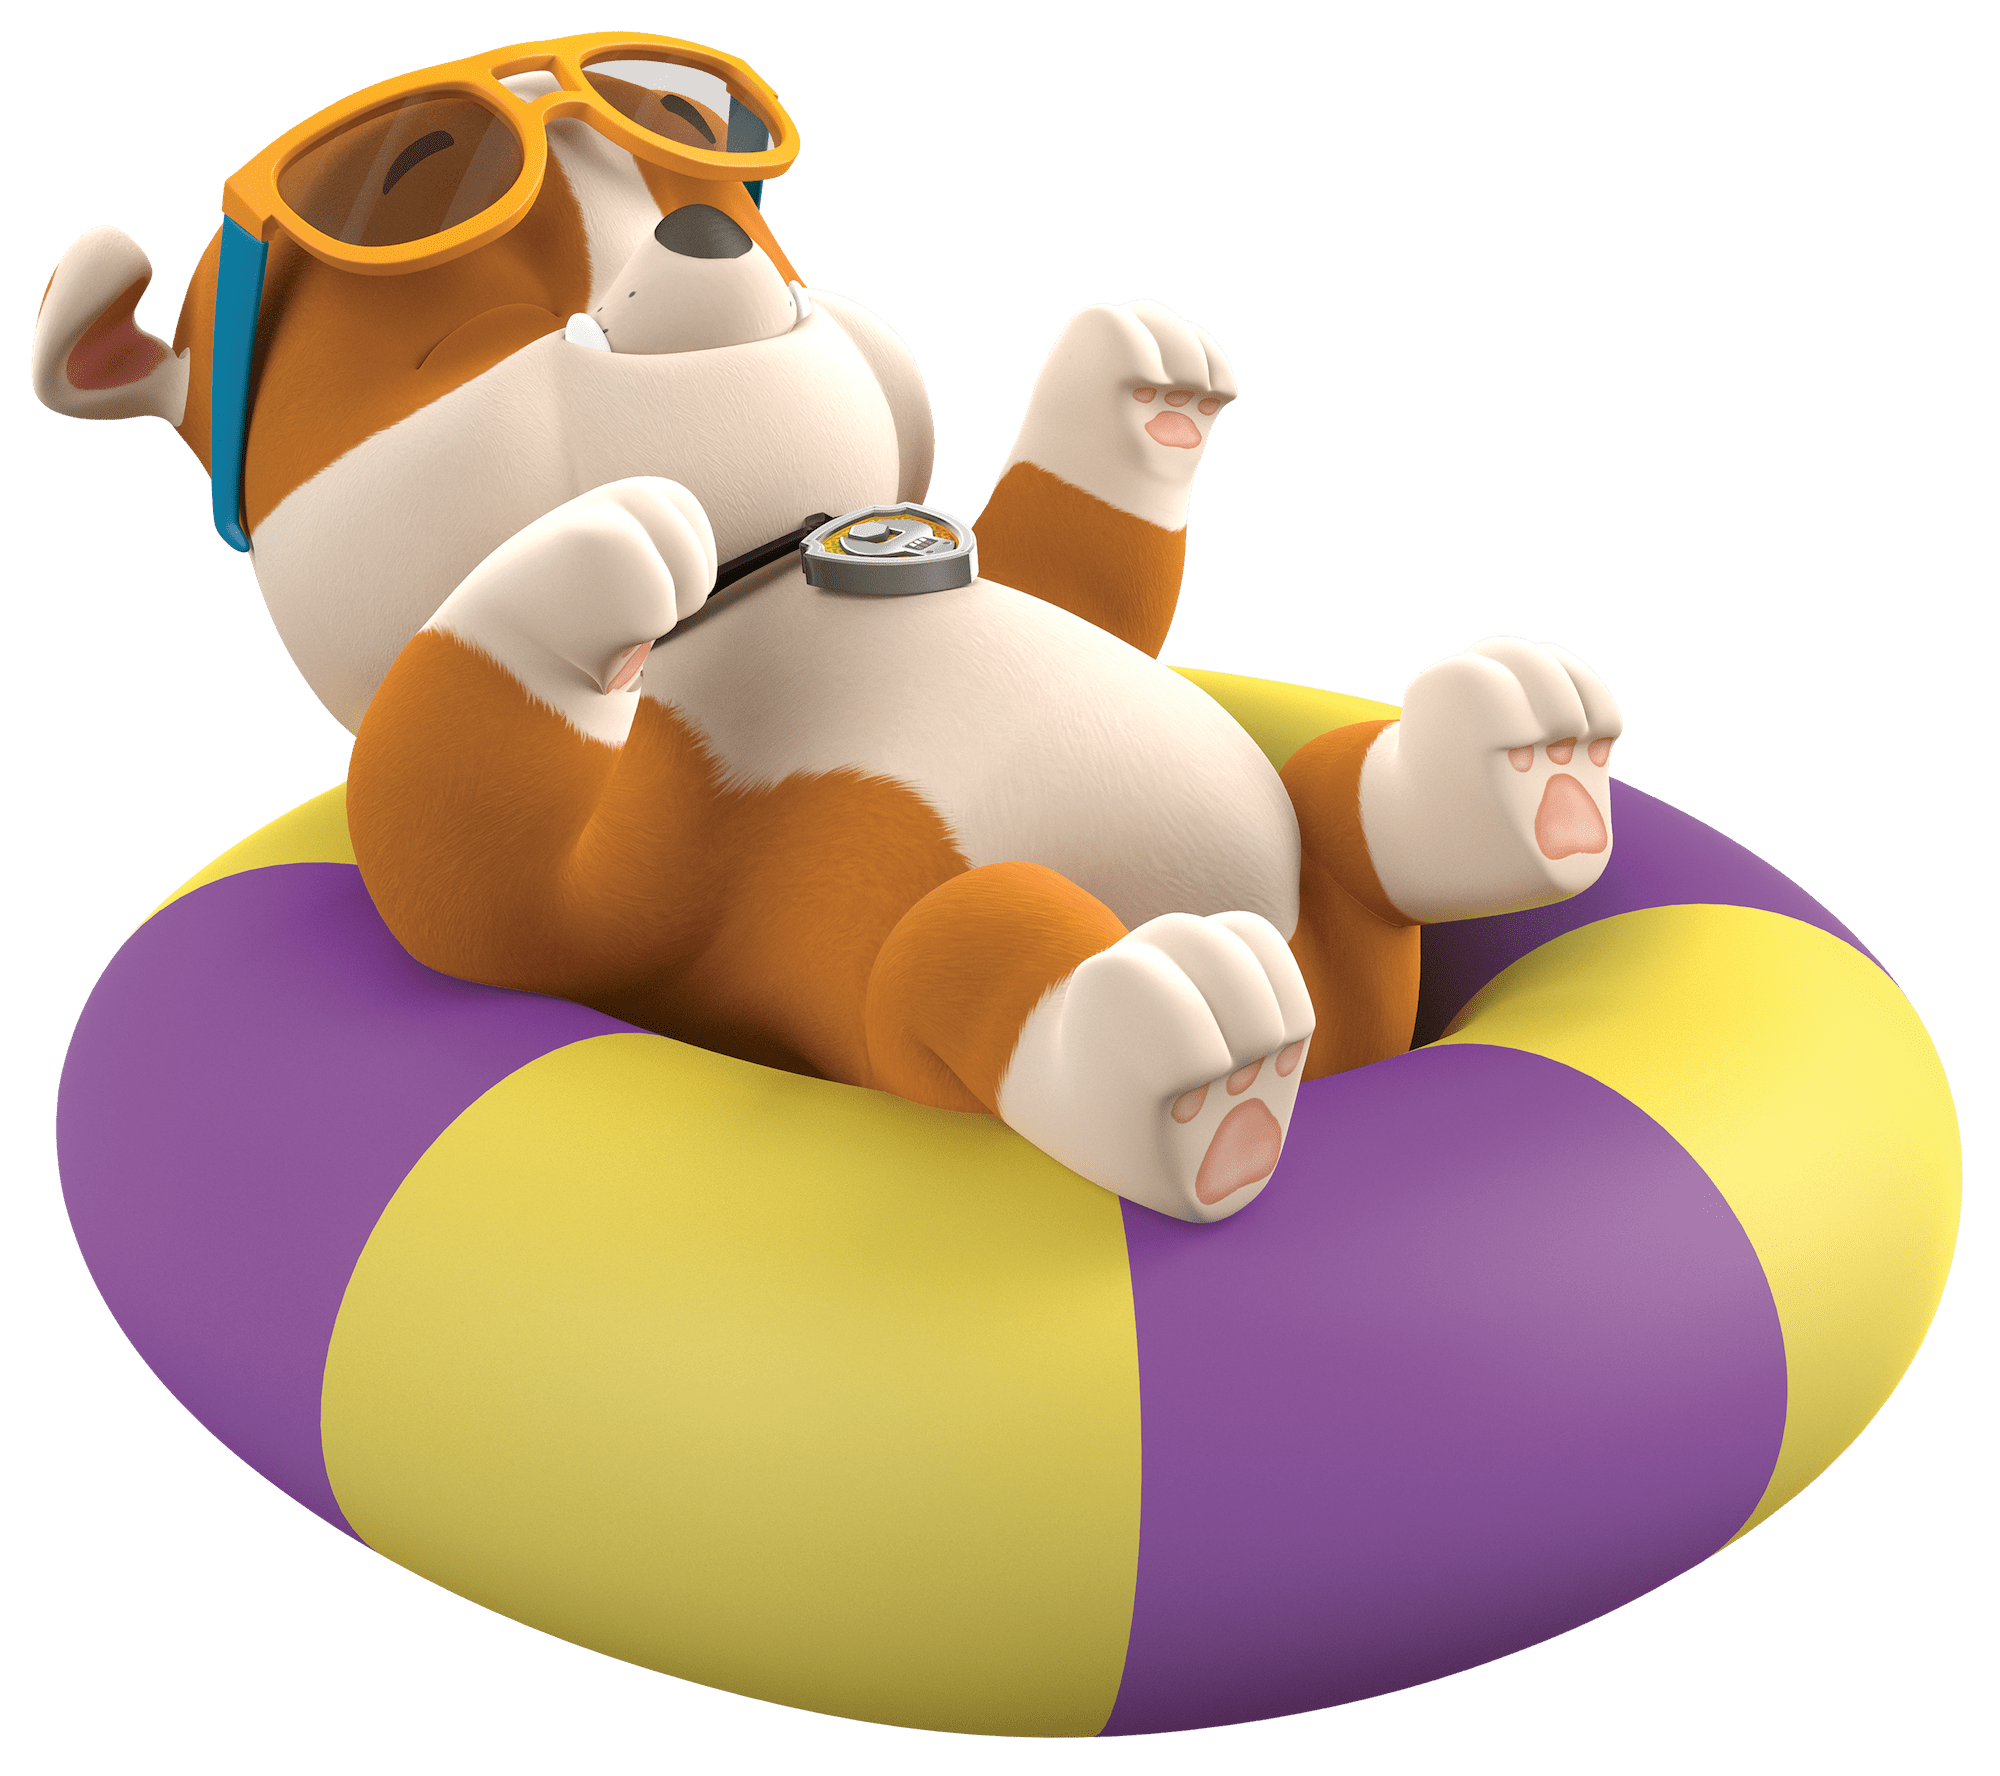 rubble take it easy paw patrol clipart png